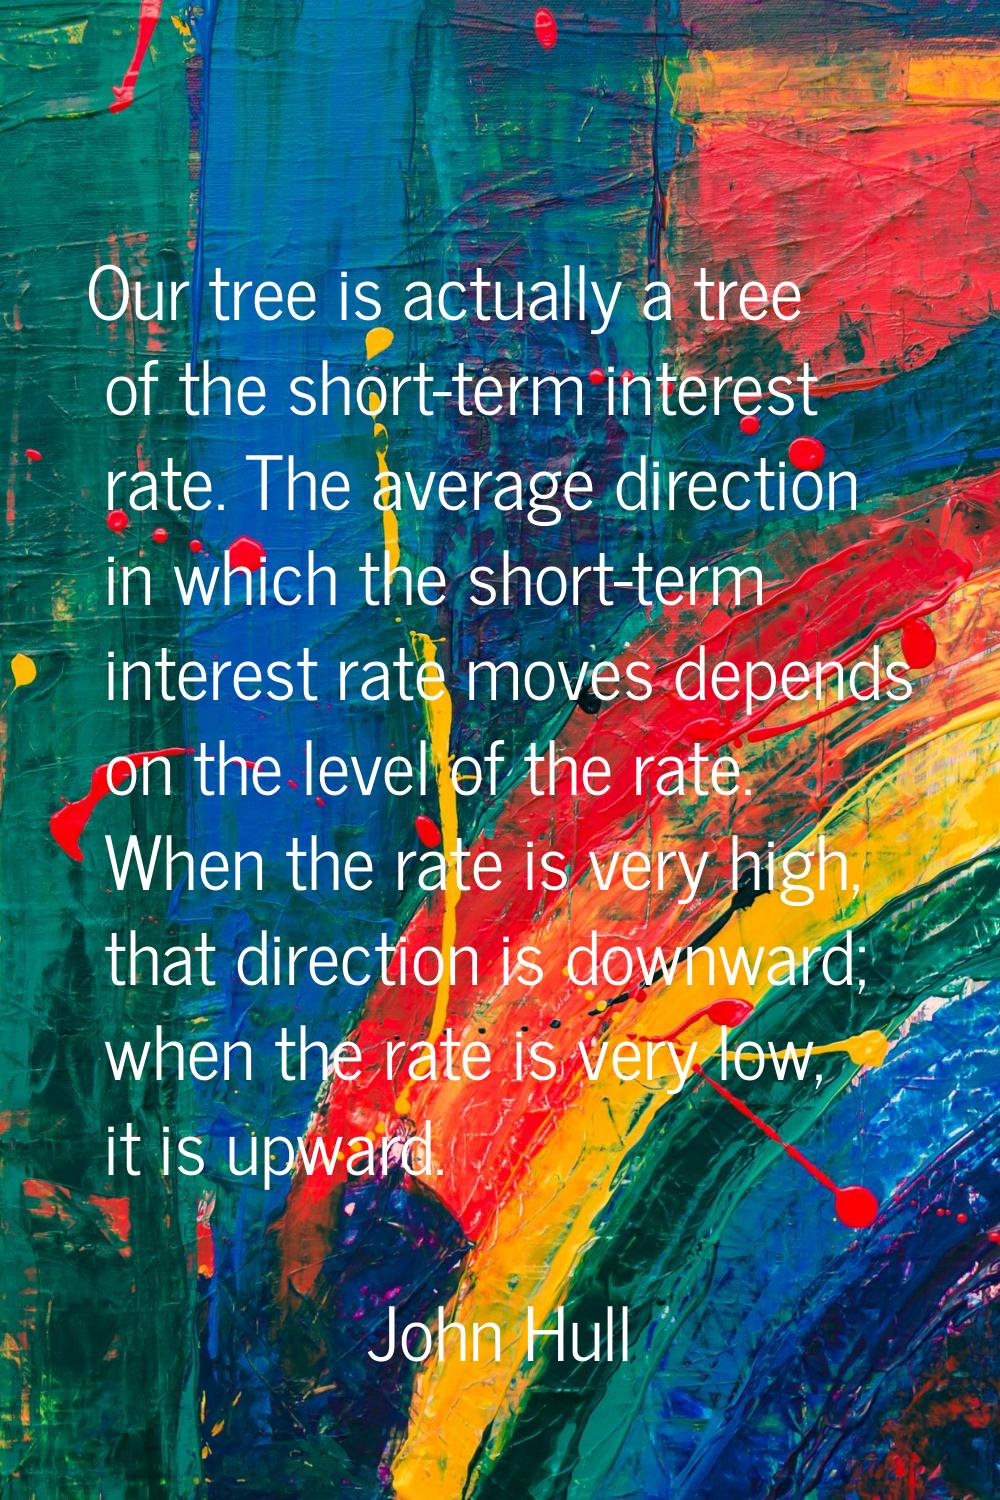 Our tree is actually a tree of the short-term interest rate. The average direction in which the sho